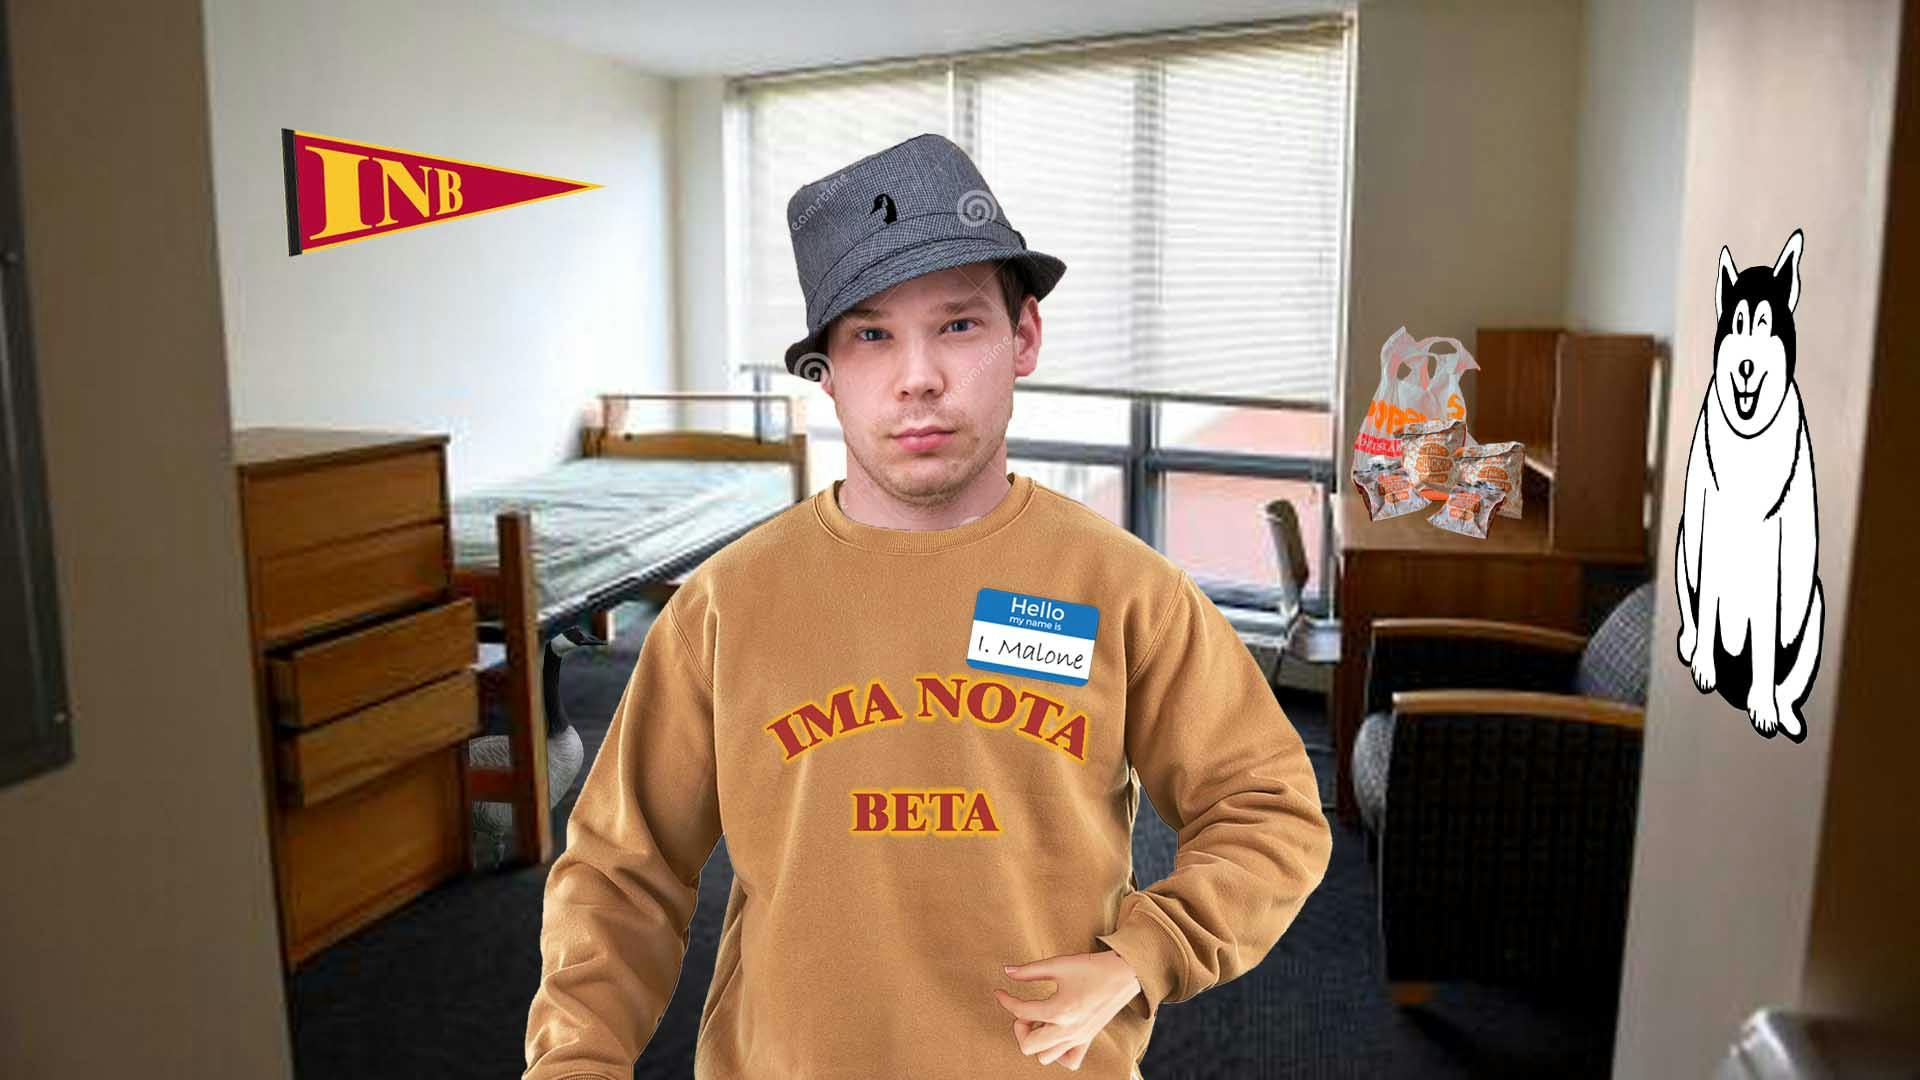 Image for Student Threatens a Discrimination Lawsuit Against Sorority, Says He "Just Wants to Meet Females"